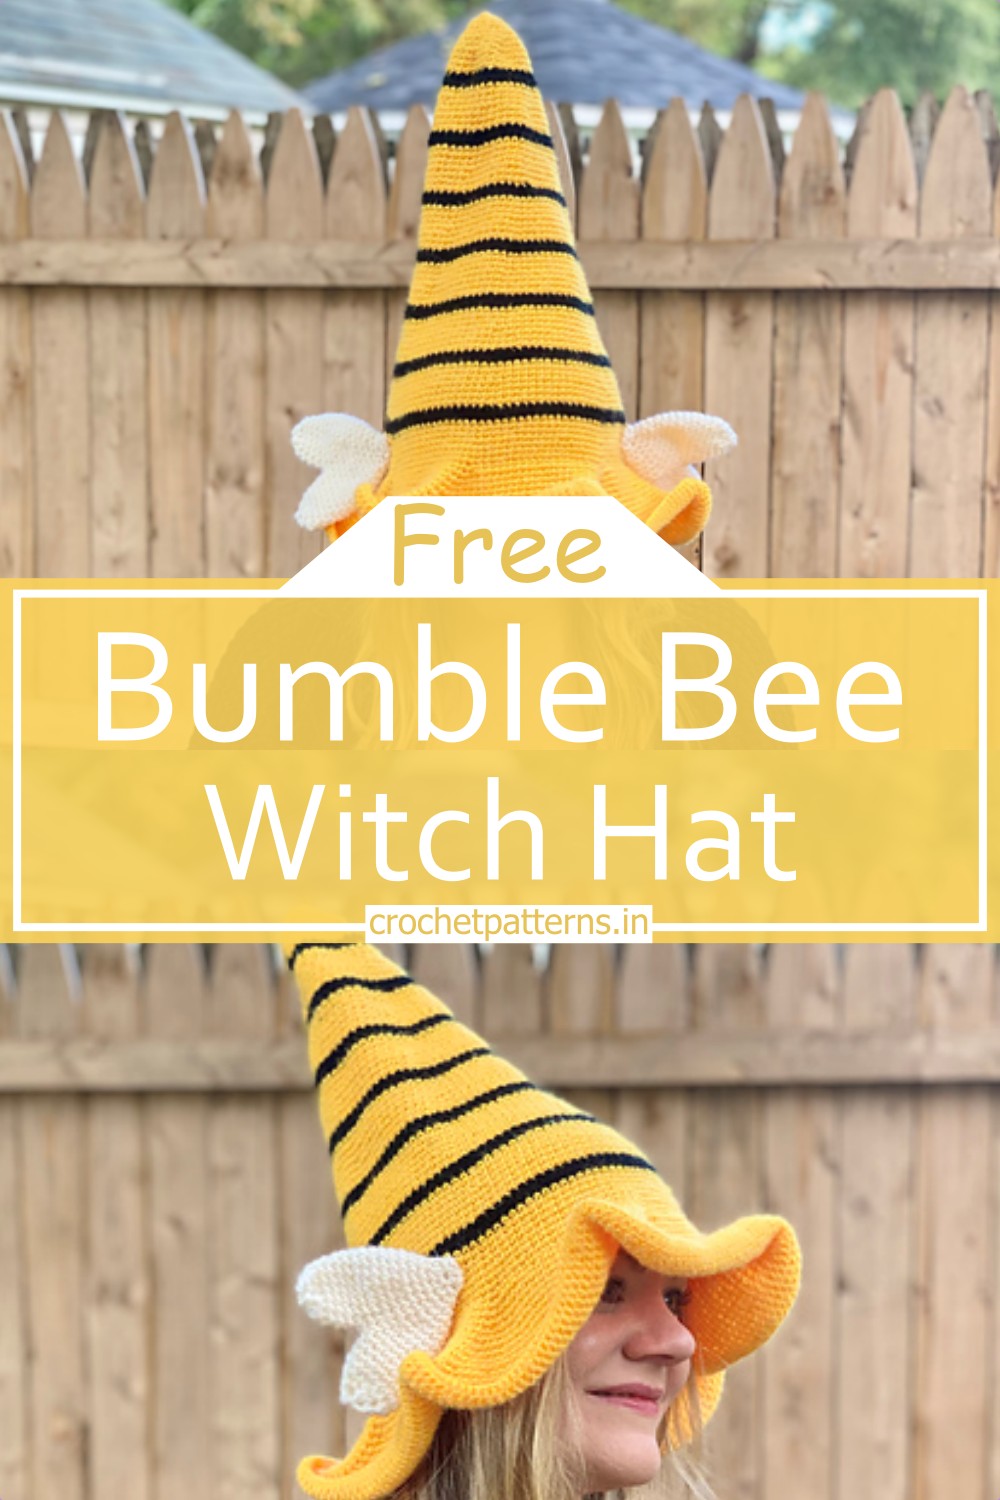 Bumble Bee Witch Hat